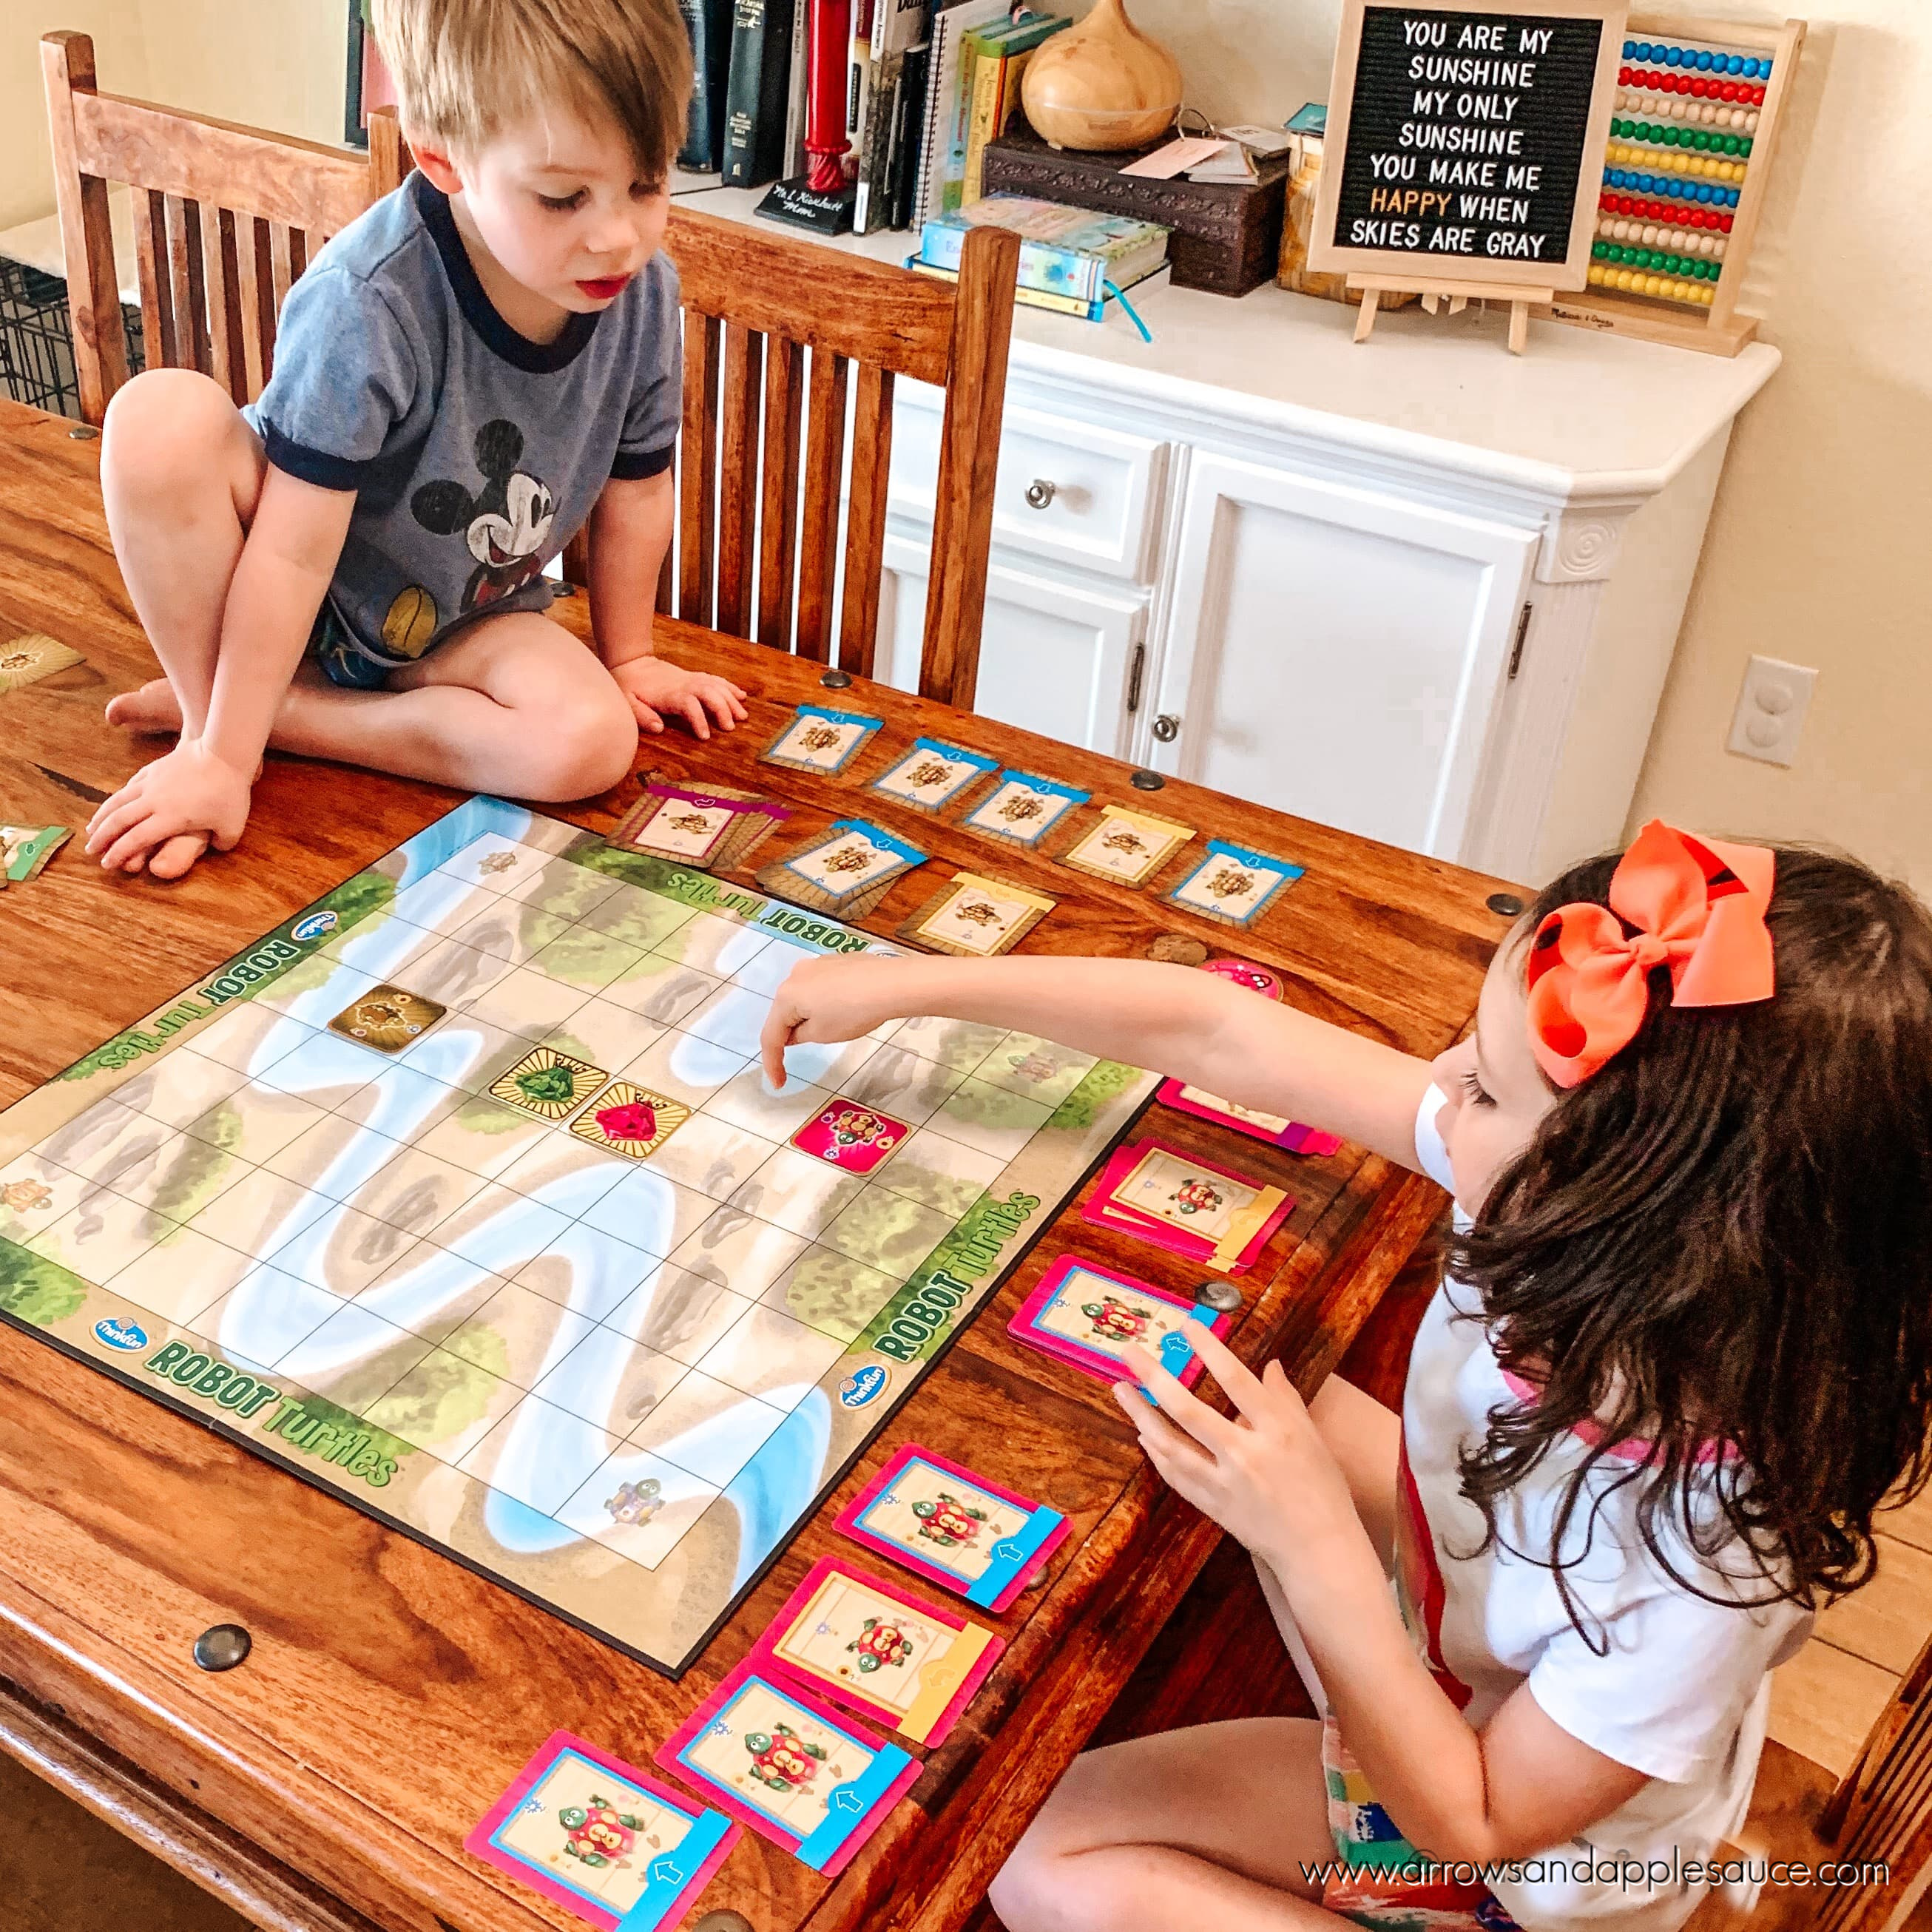 We're enjoying the science of computer coding with our favorite preschool science game! Game schooling is a great way to learn new skills in every subject! #preschoolscience #kidssciencegames #preschoolathome #kidscodinggame #computercodingforkids #stem #gameschooling #homeschoolgames